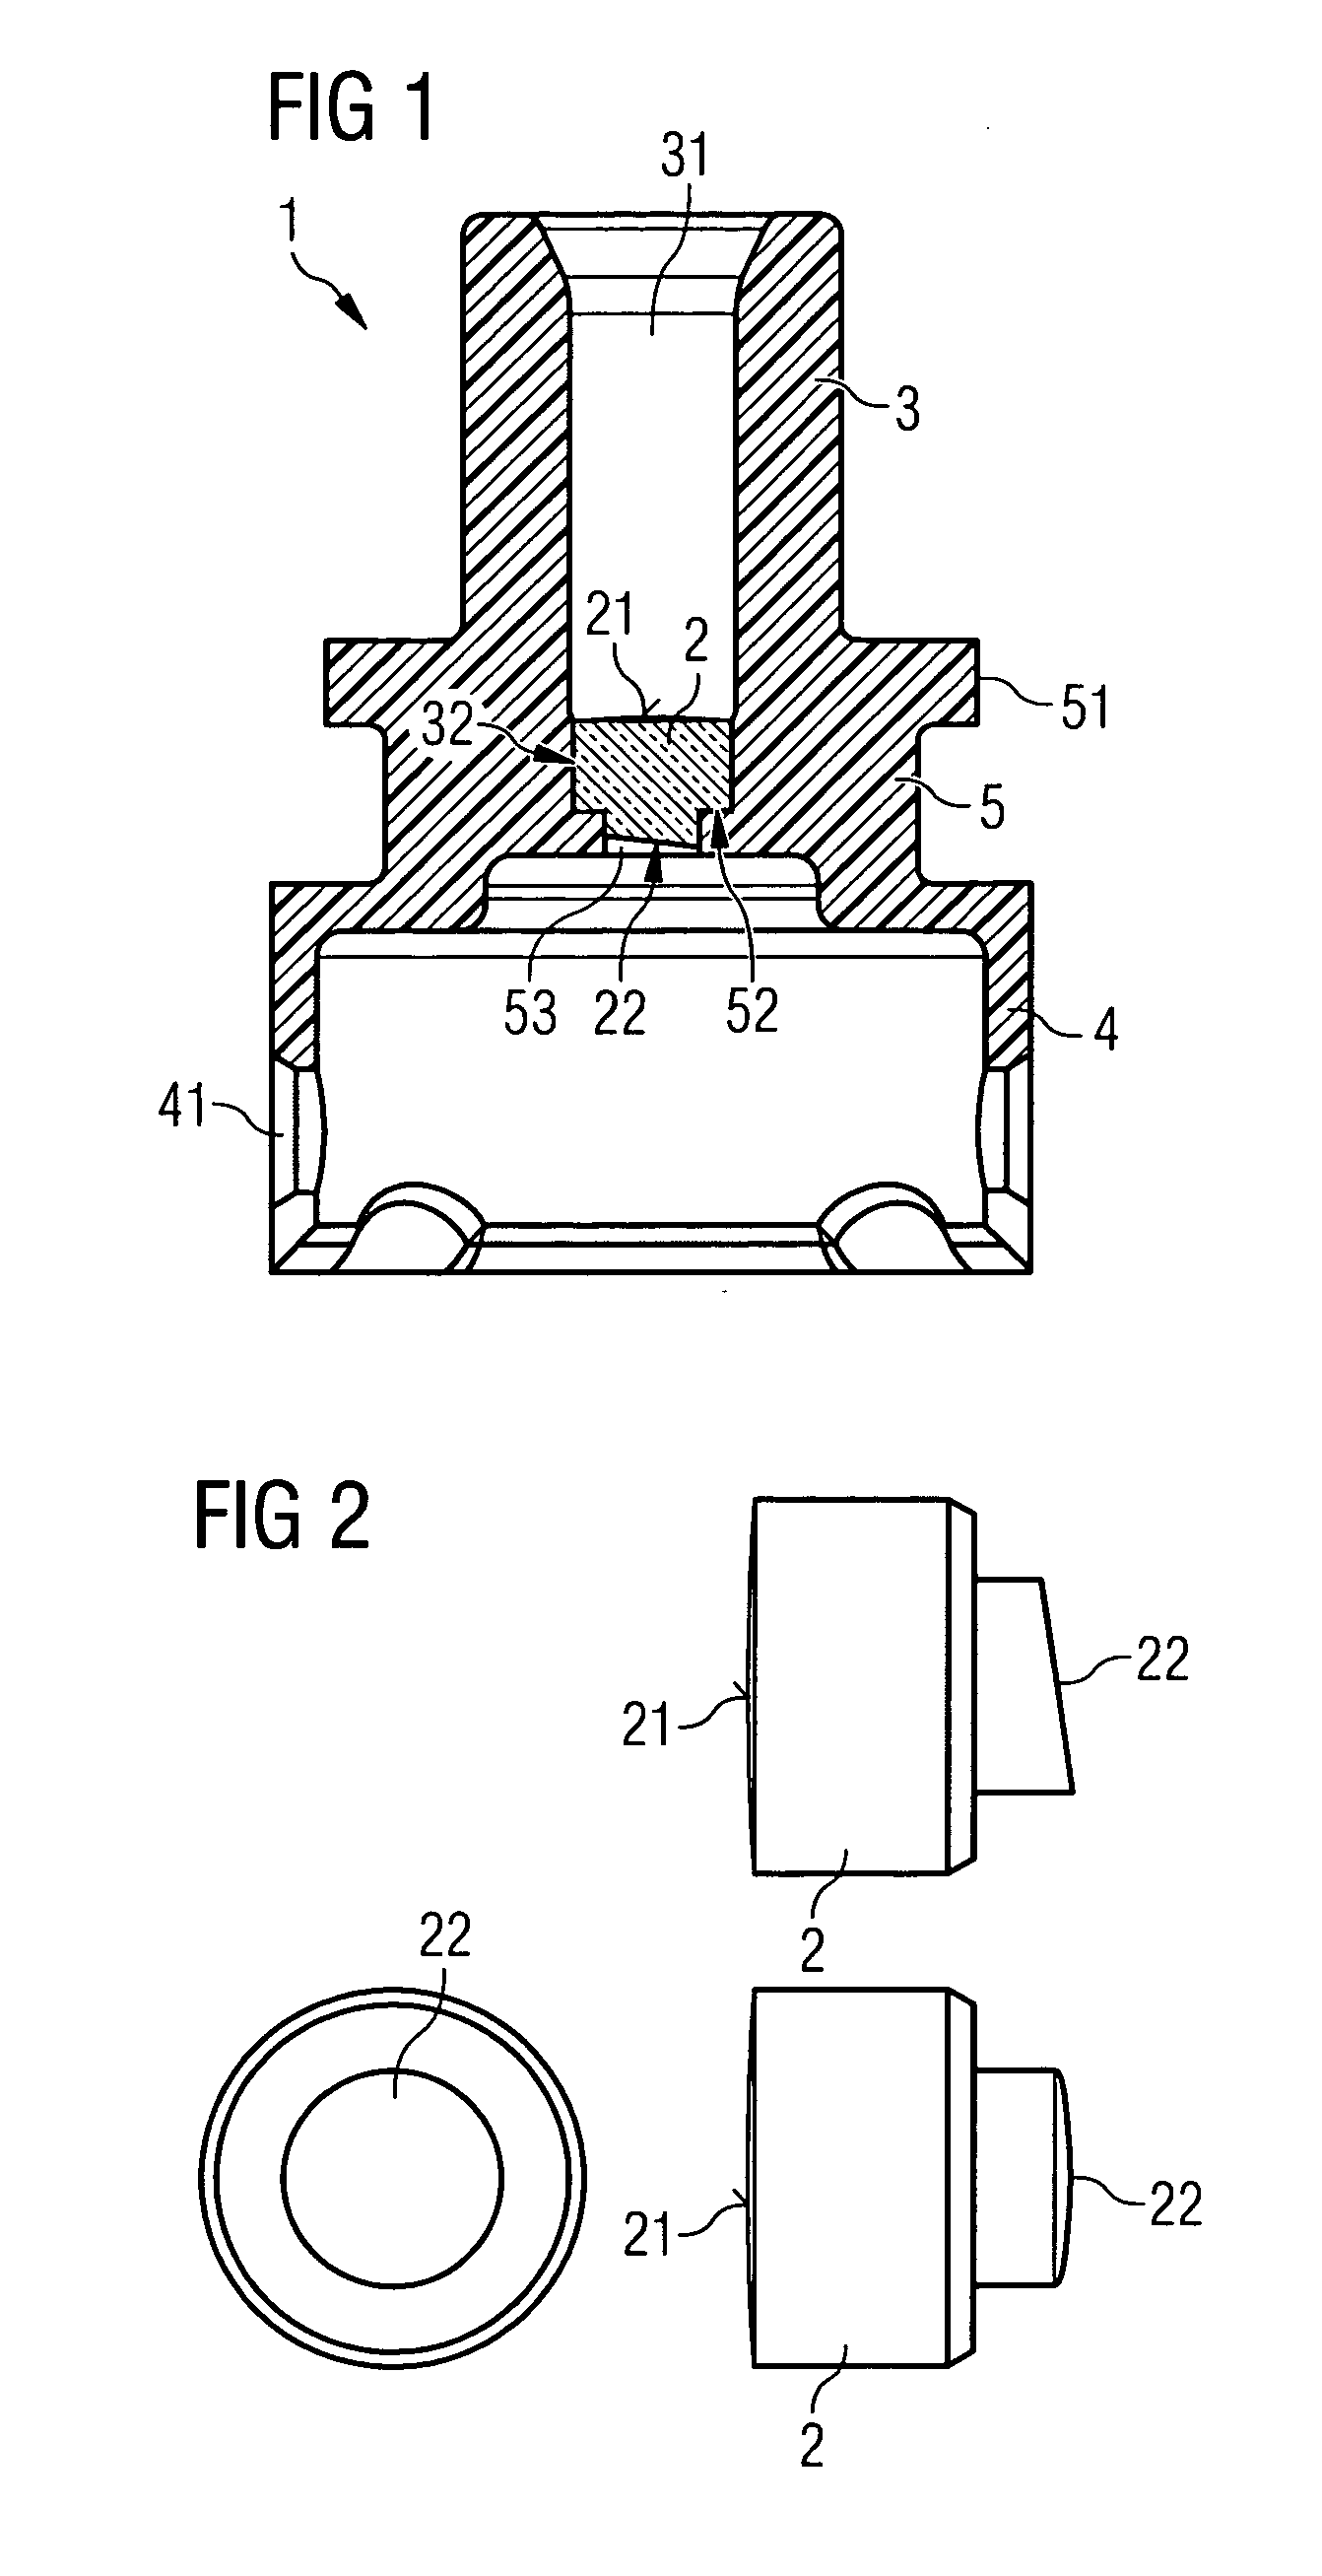 Coupling unit for coupling an optical transmitting and/or receiving module to an optical fiber connector